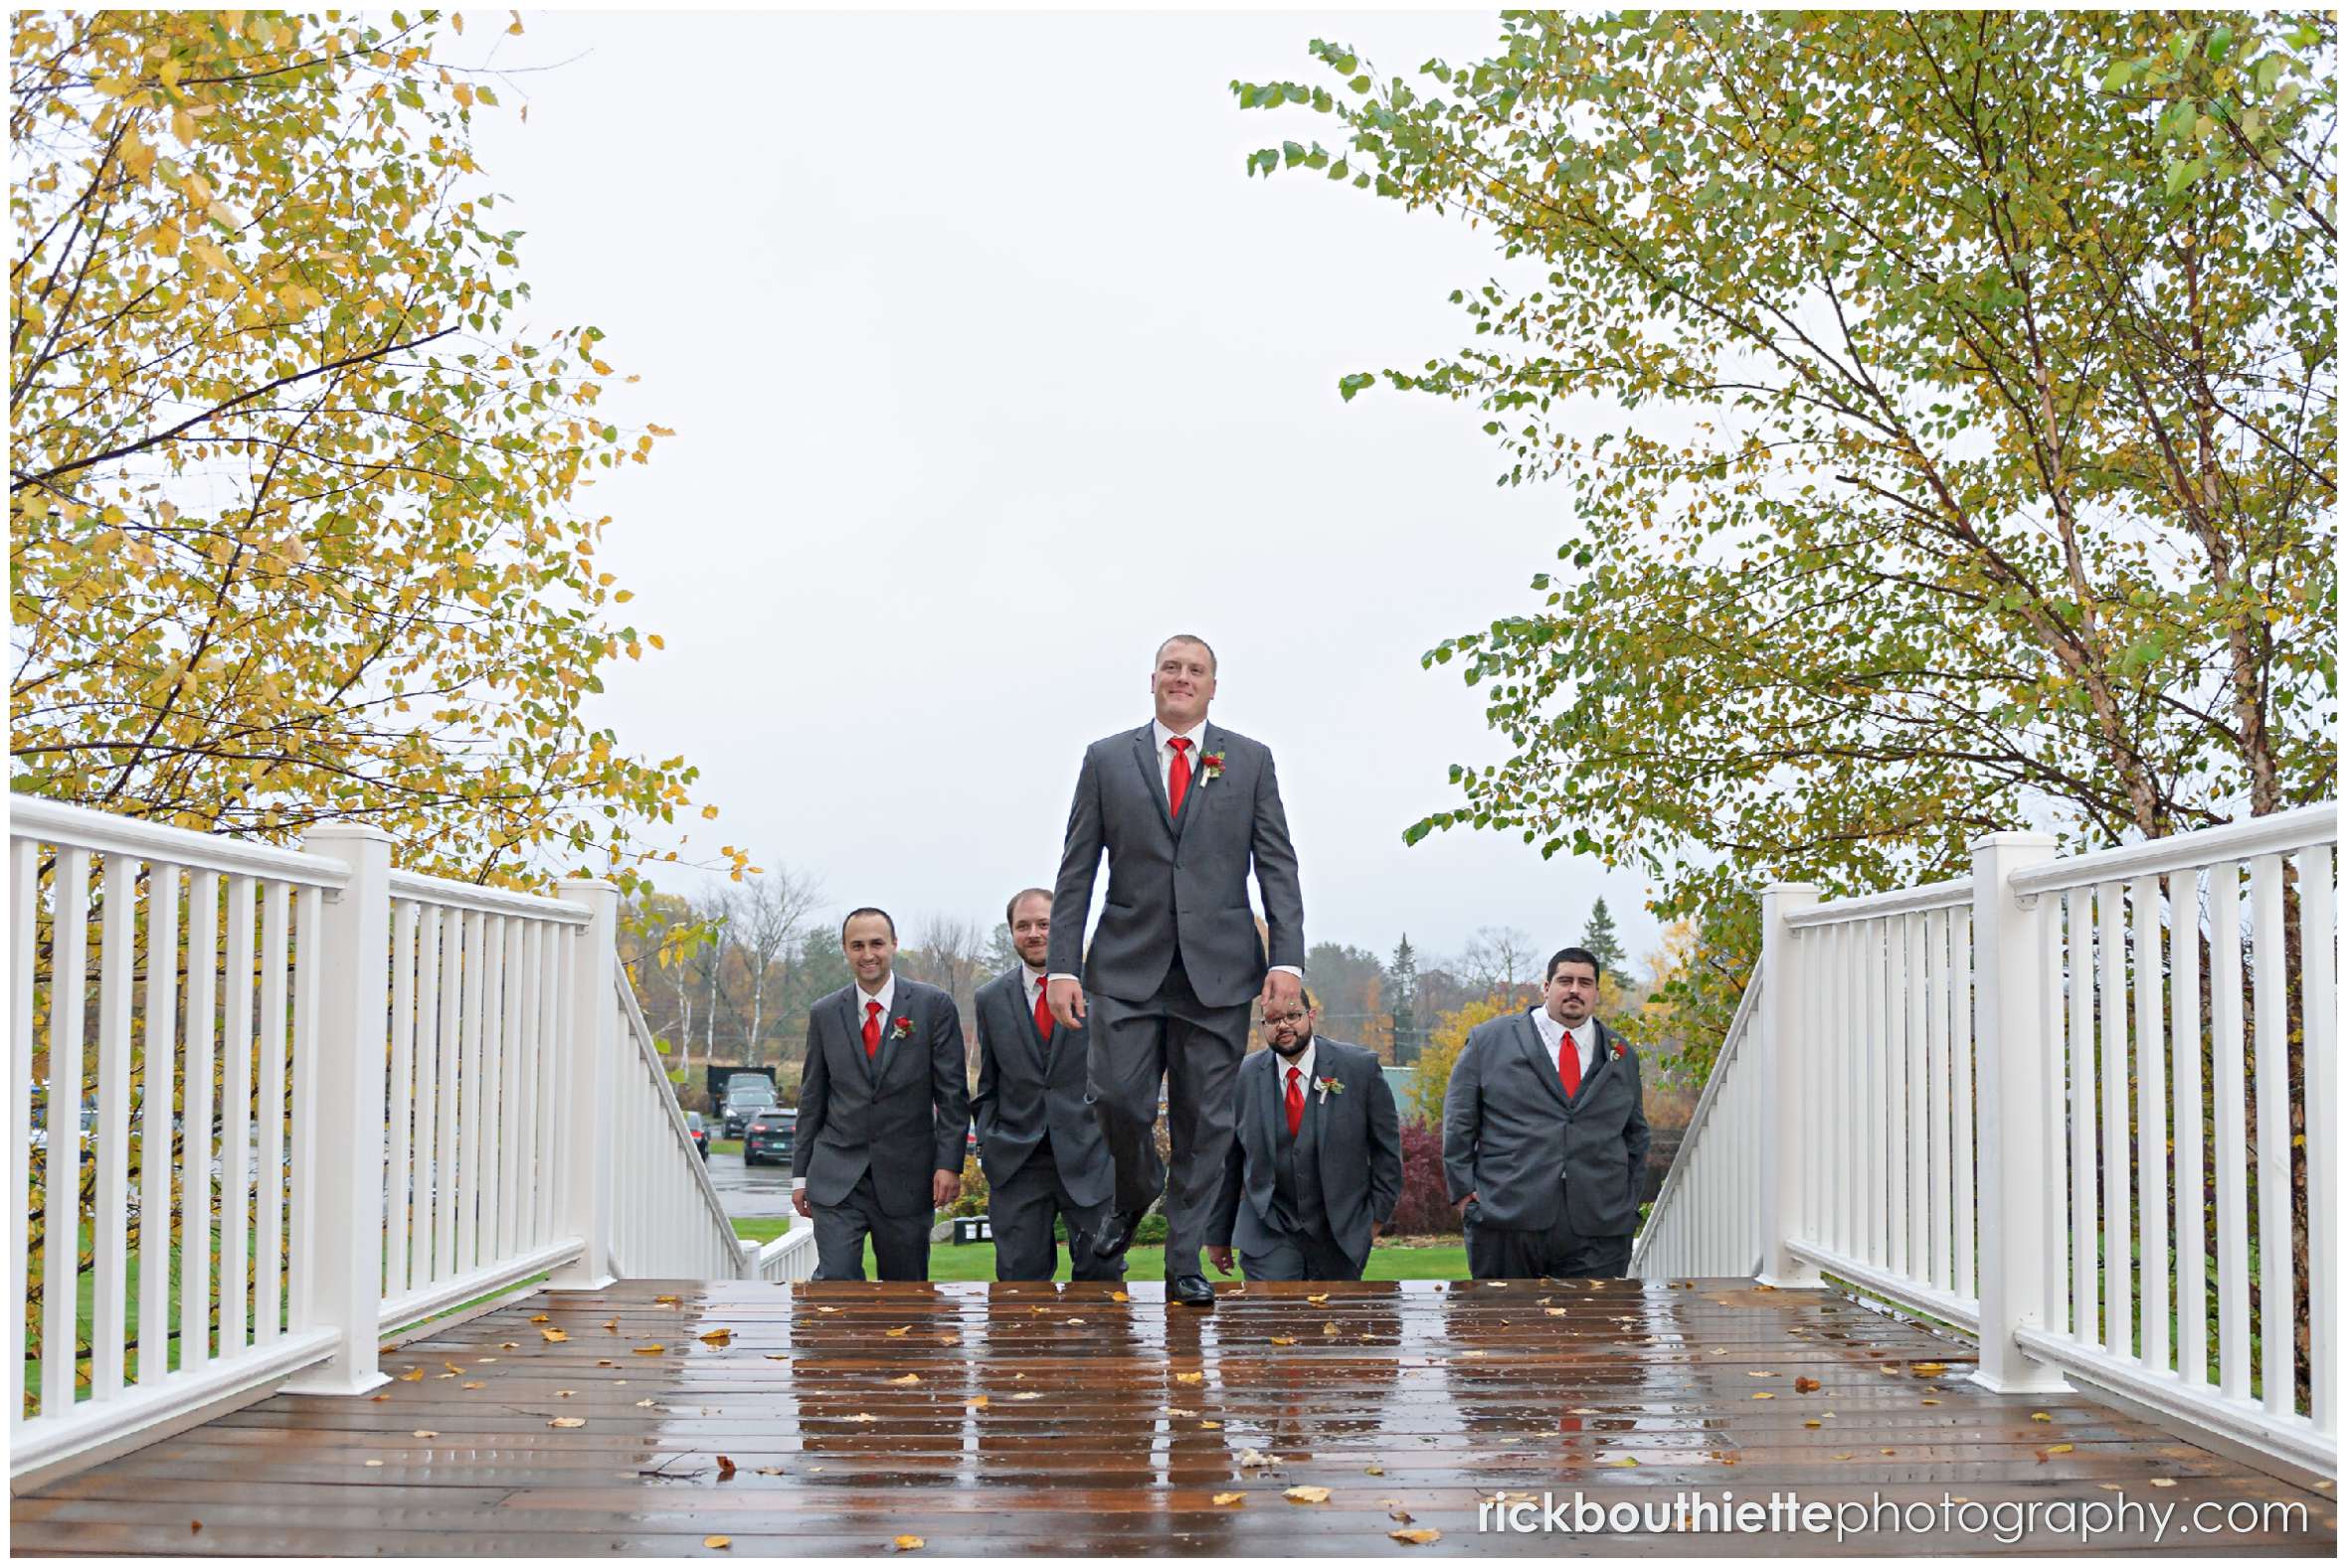 the groom and his groomsmen coming up the stairs at mountain view grand resort